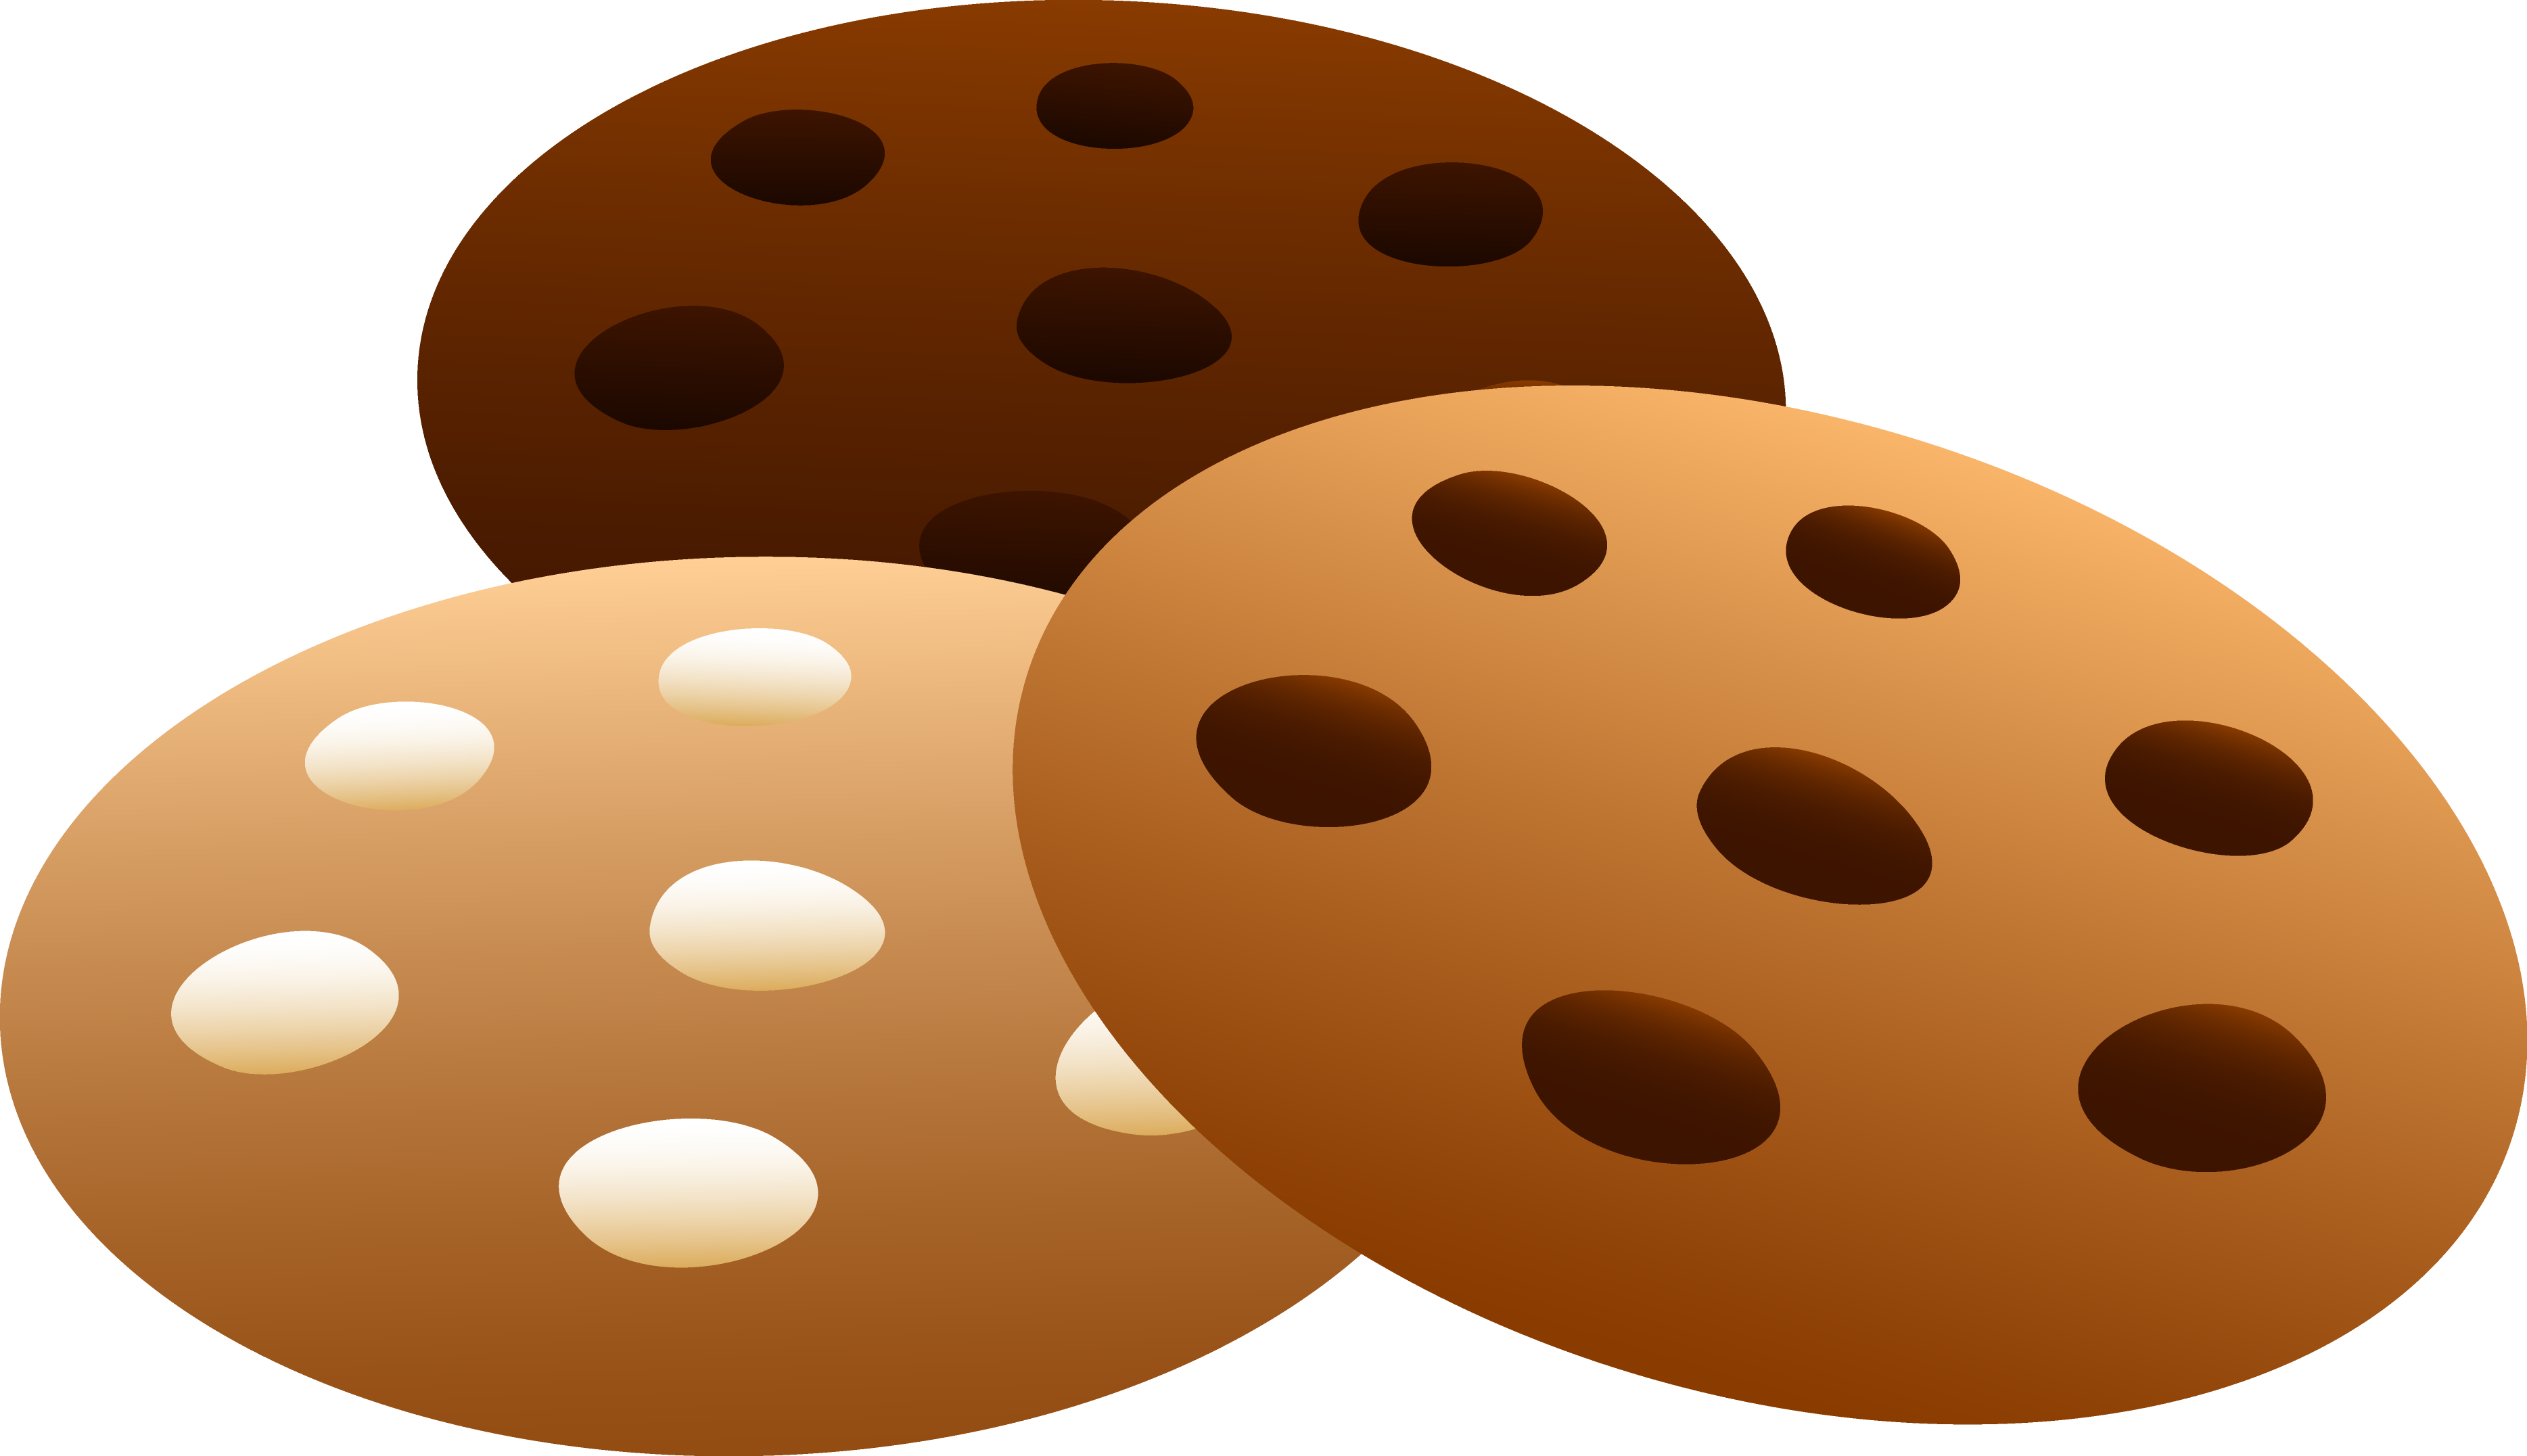 Clip art images clipartall. Clipart food cookie